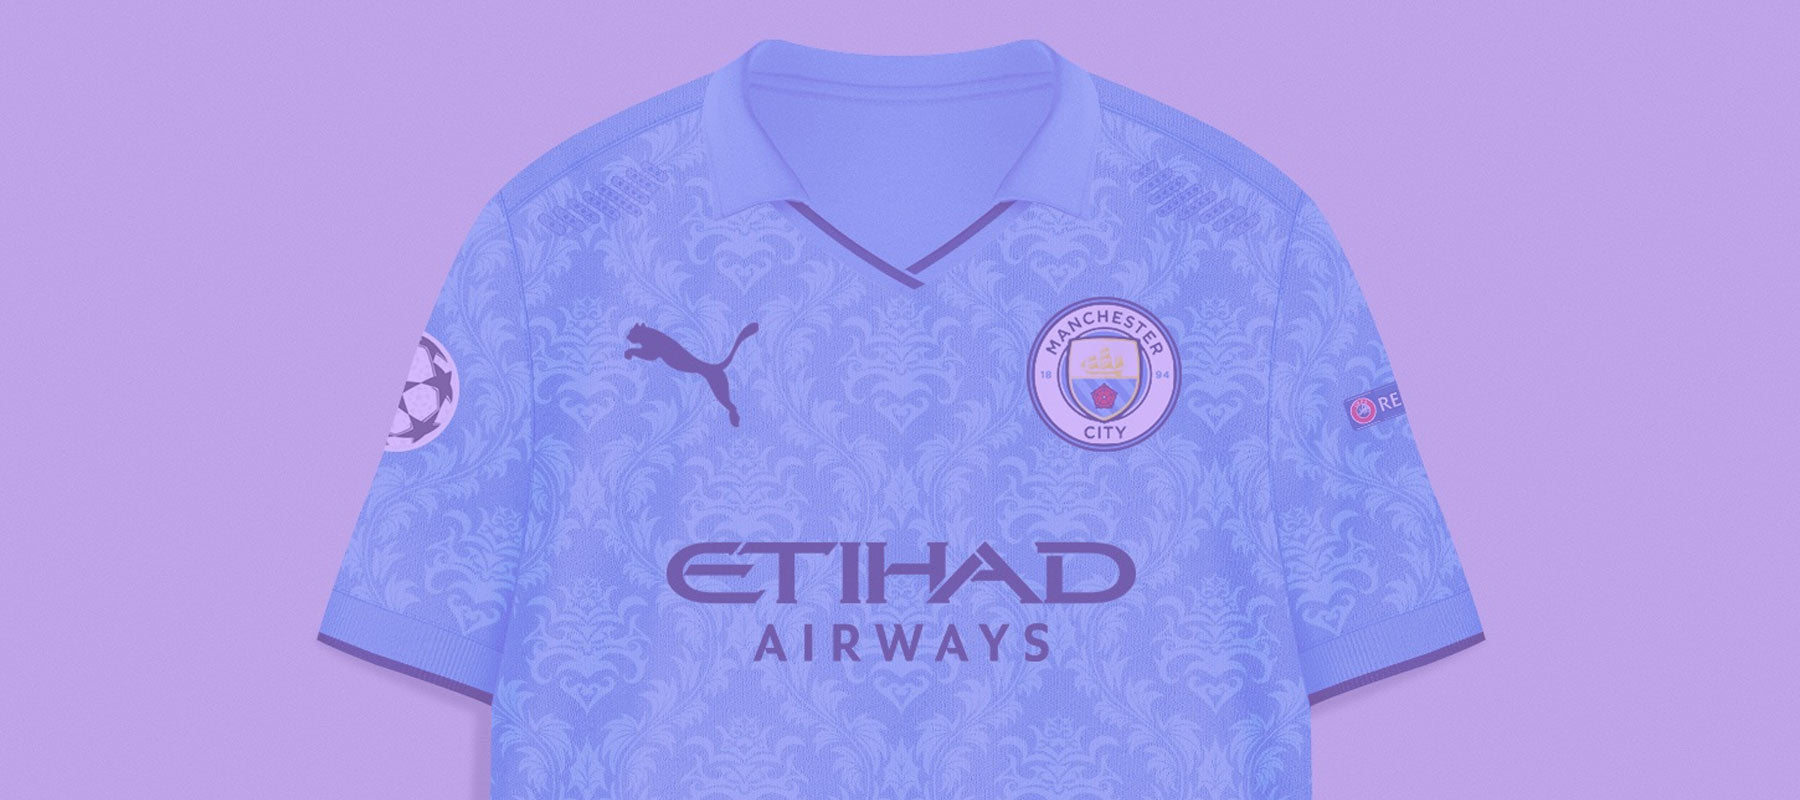 Man City concept kits that you’ll actually like